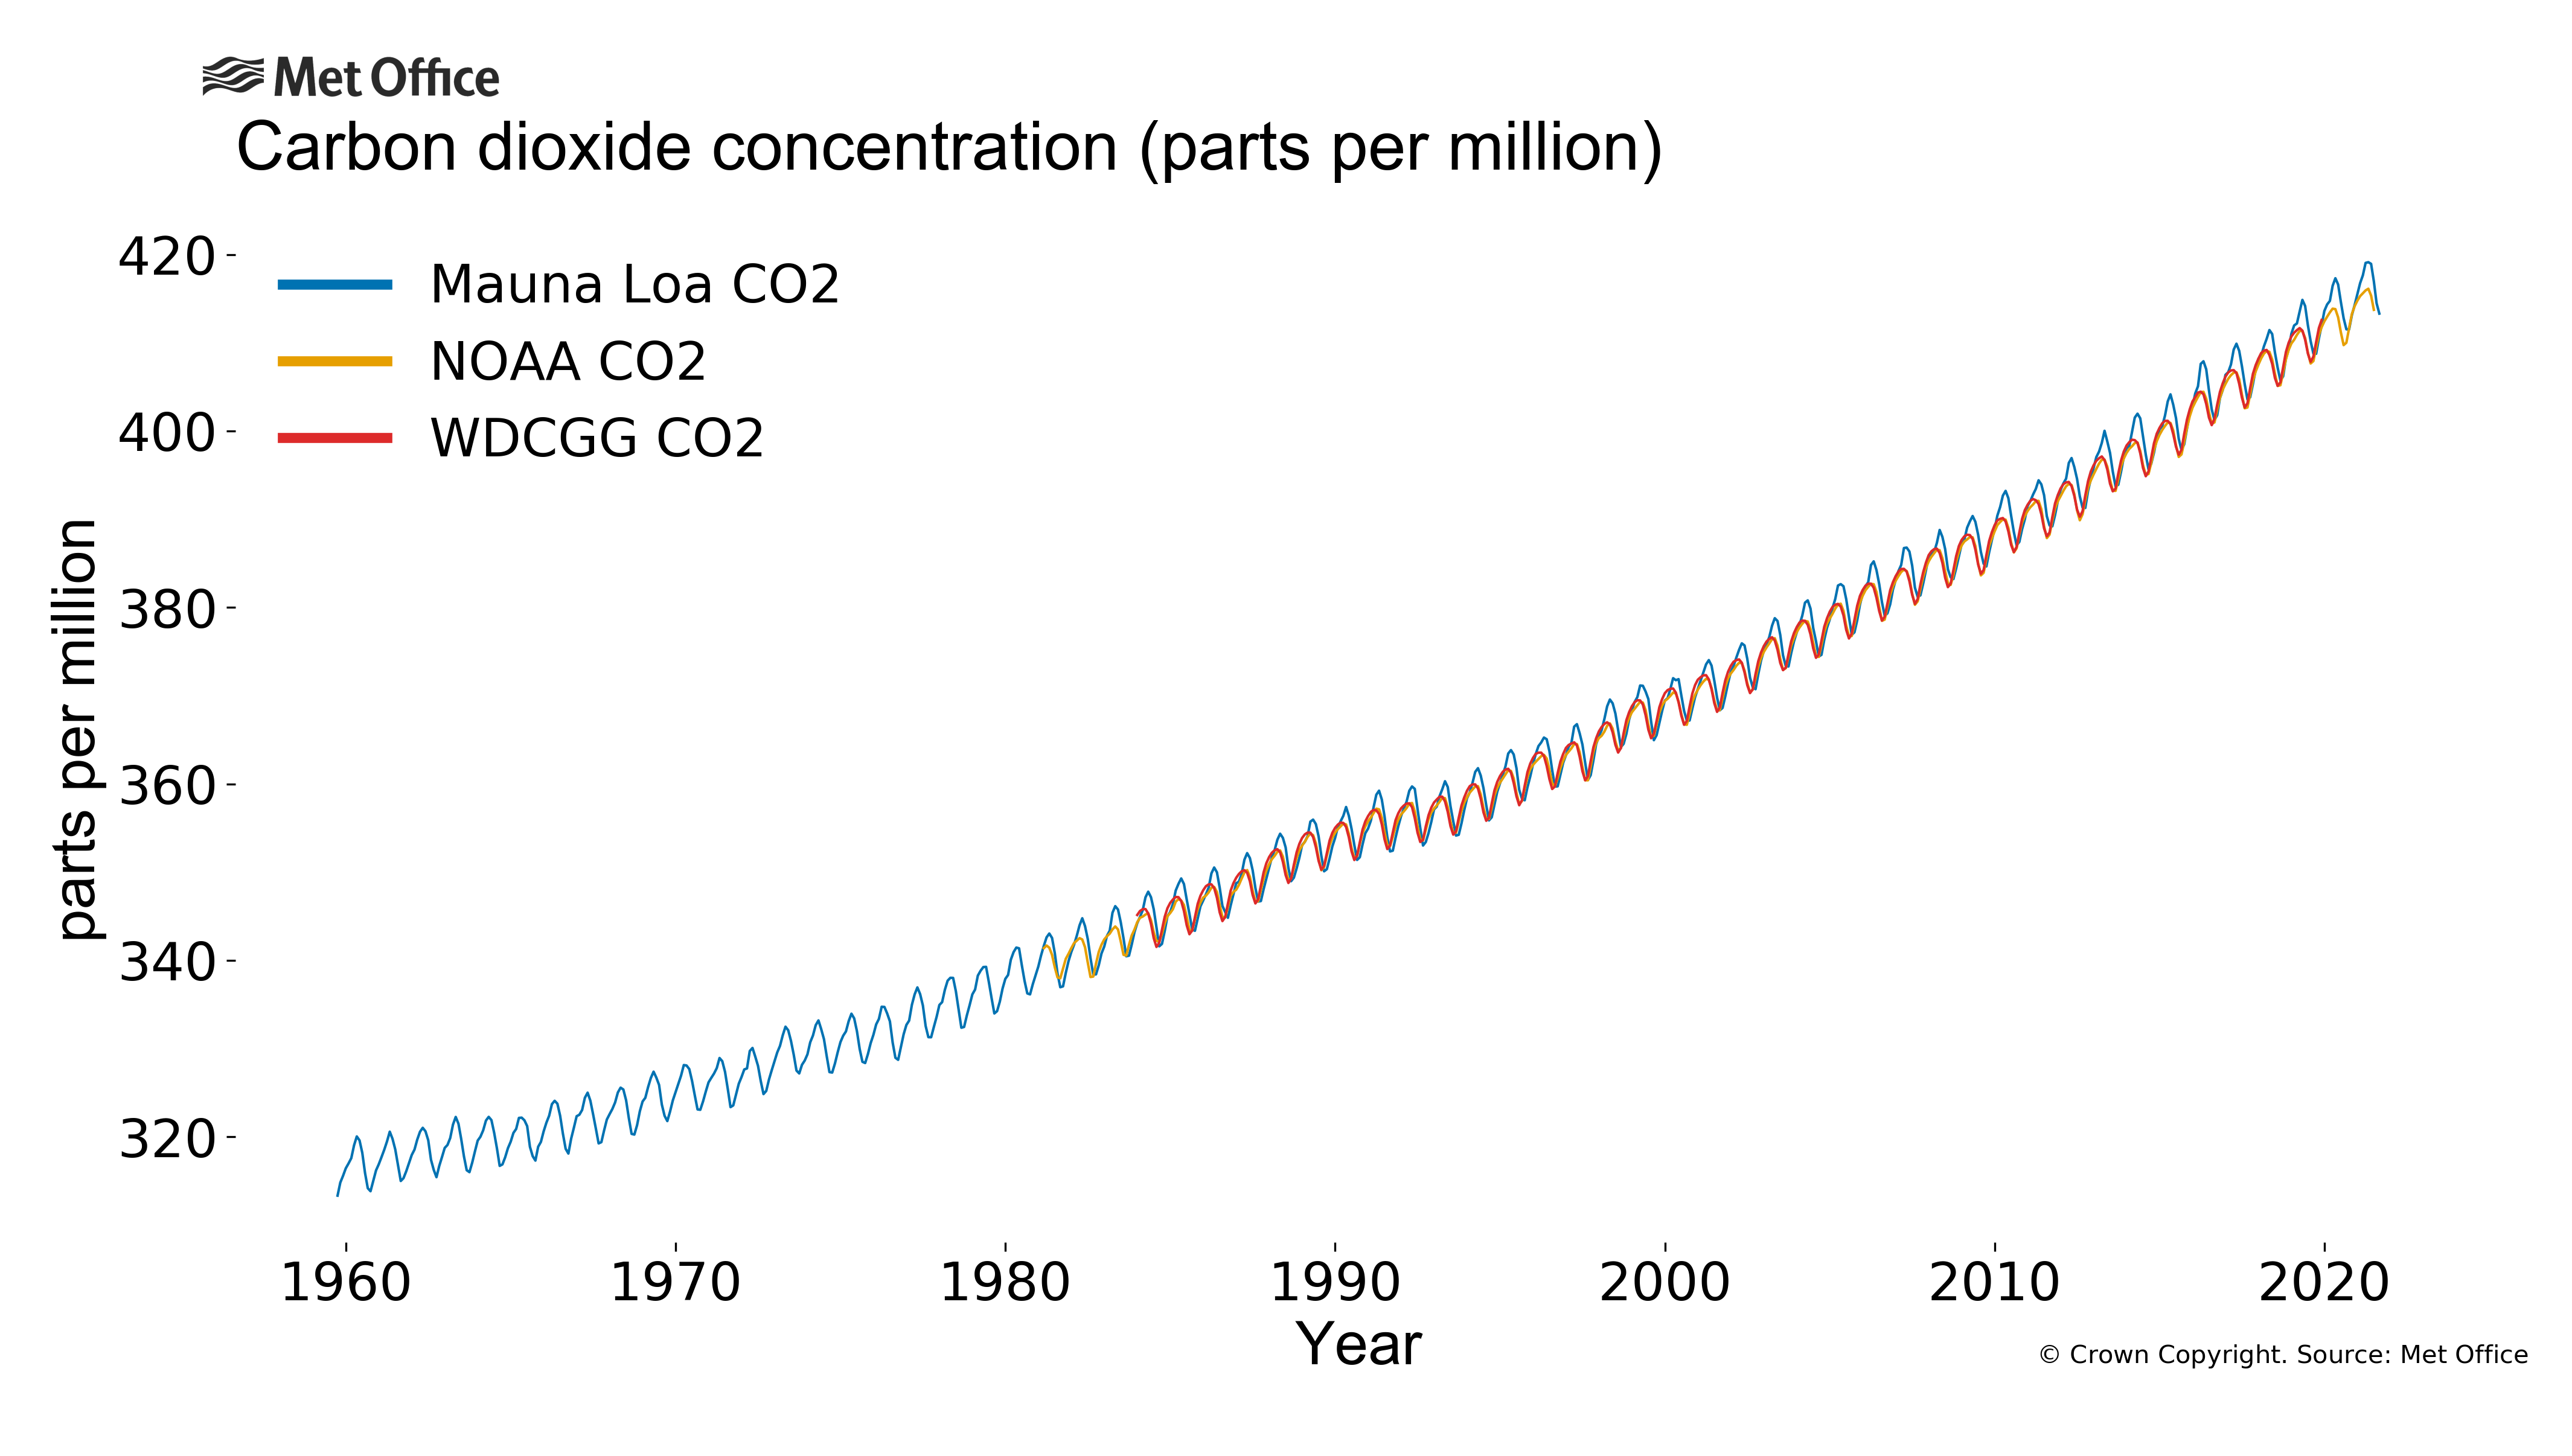 
Monthly carbon dioxide concentration in the atmosphere.
